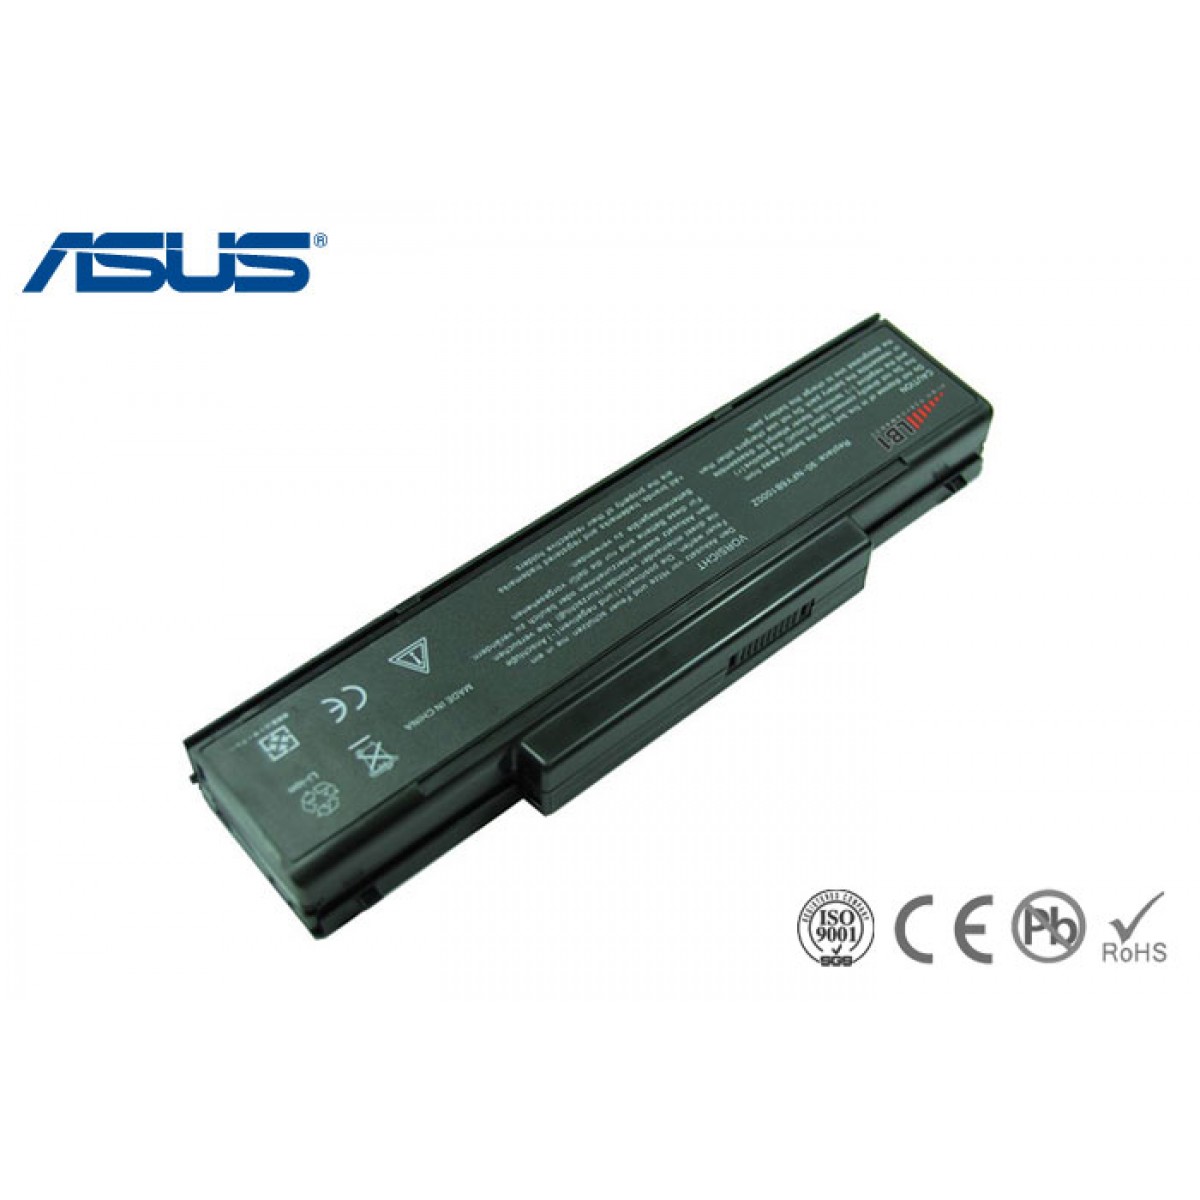 BATTERY FOR NOTEBOOK ASUS M51A COPY ,Laptop Battery